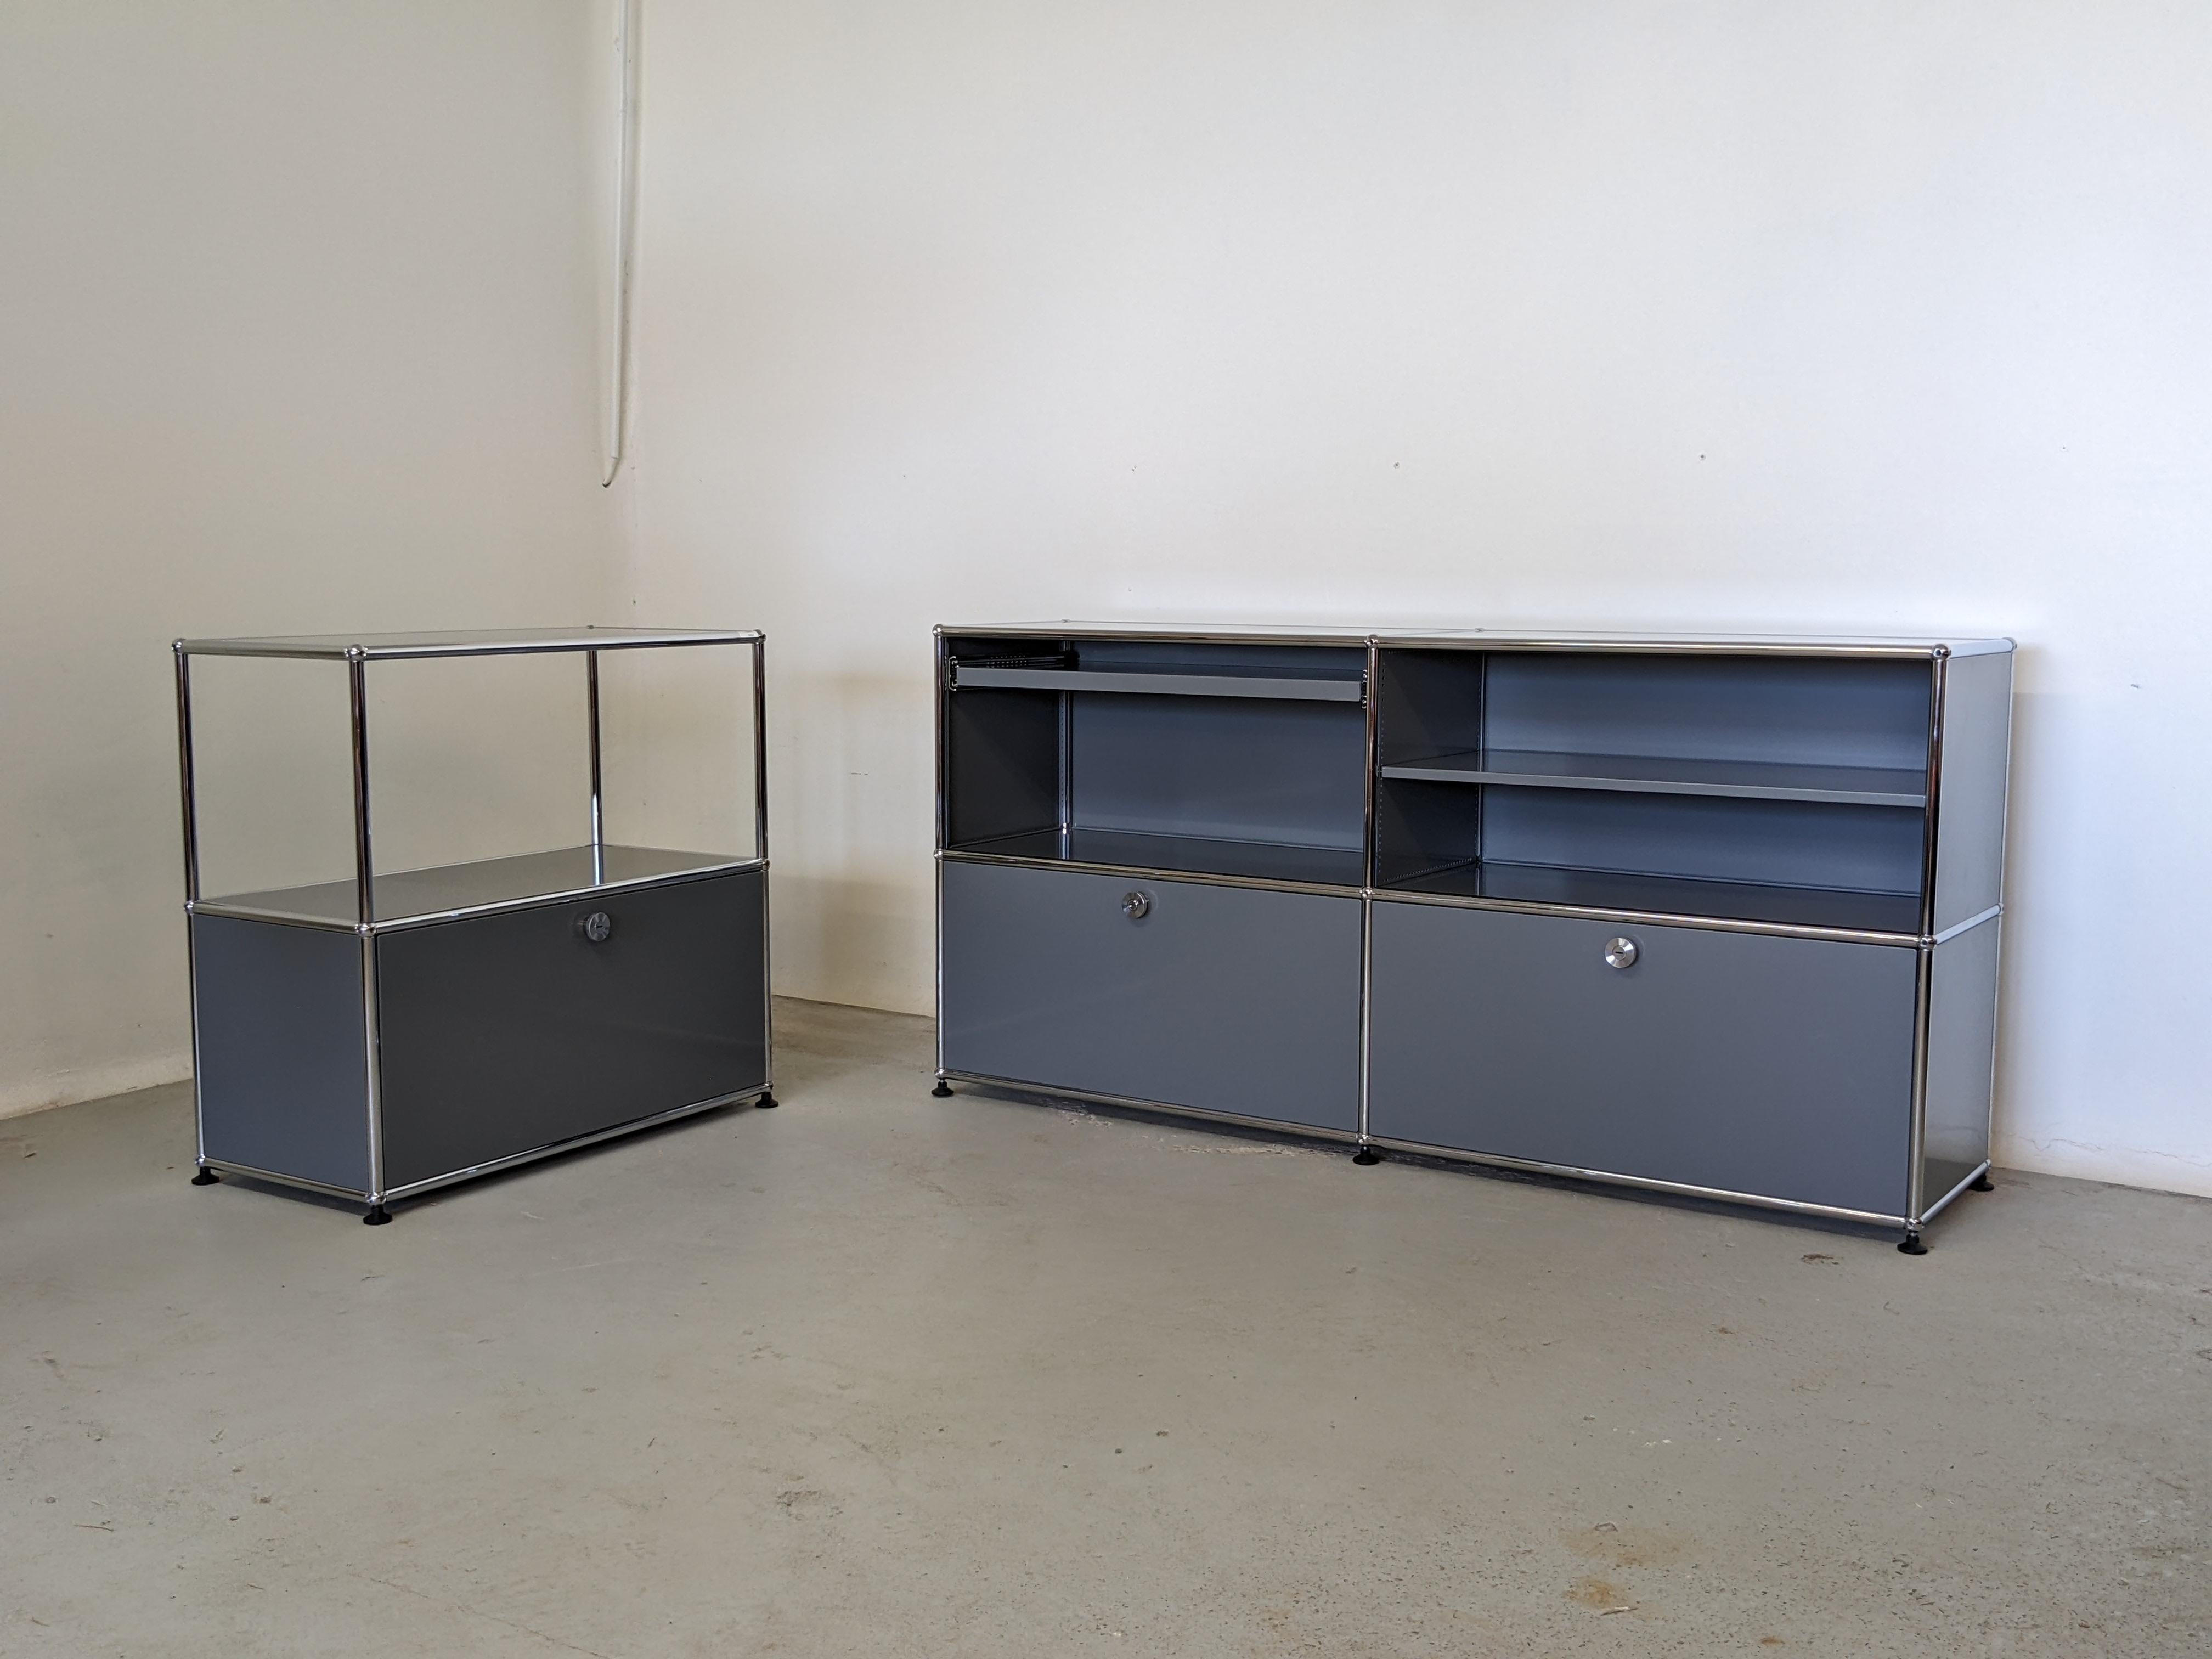 Set of 2 storage systems by USM Haller.
1 credenza C2 and 1 strage system C1.
Made of anthracite grey powder coated metal and chrome metal.

The credenza features 2 pull out drawers on the bottom, a pull-out shelf and a regular shelf on the top.